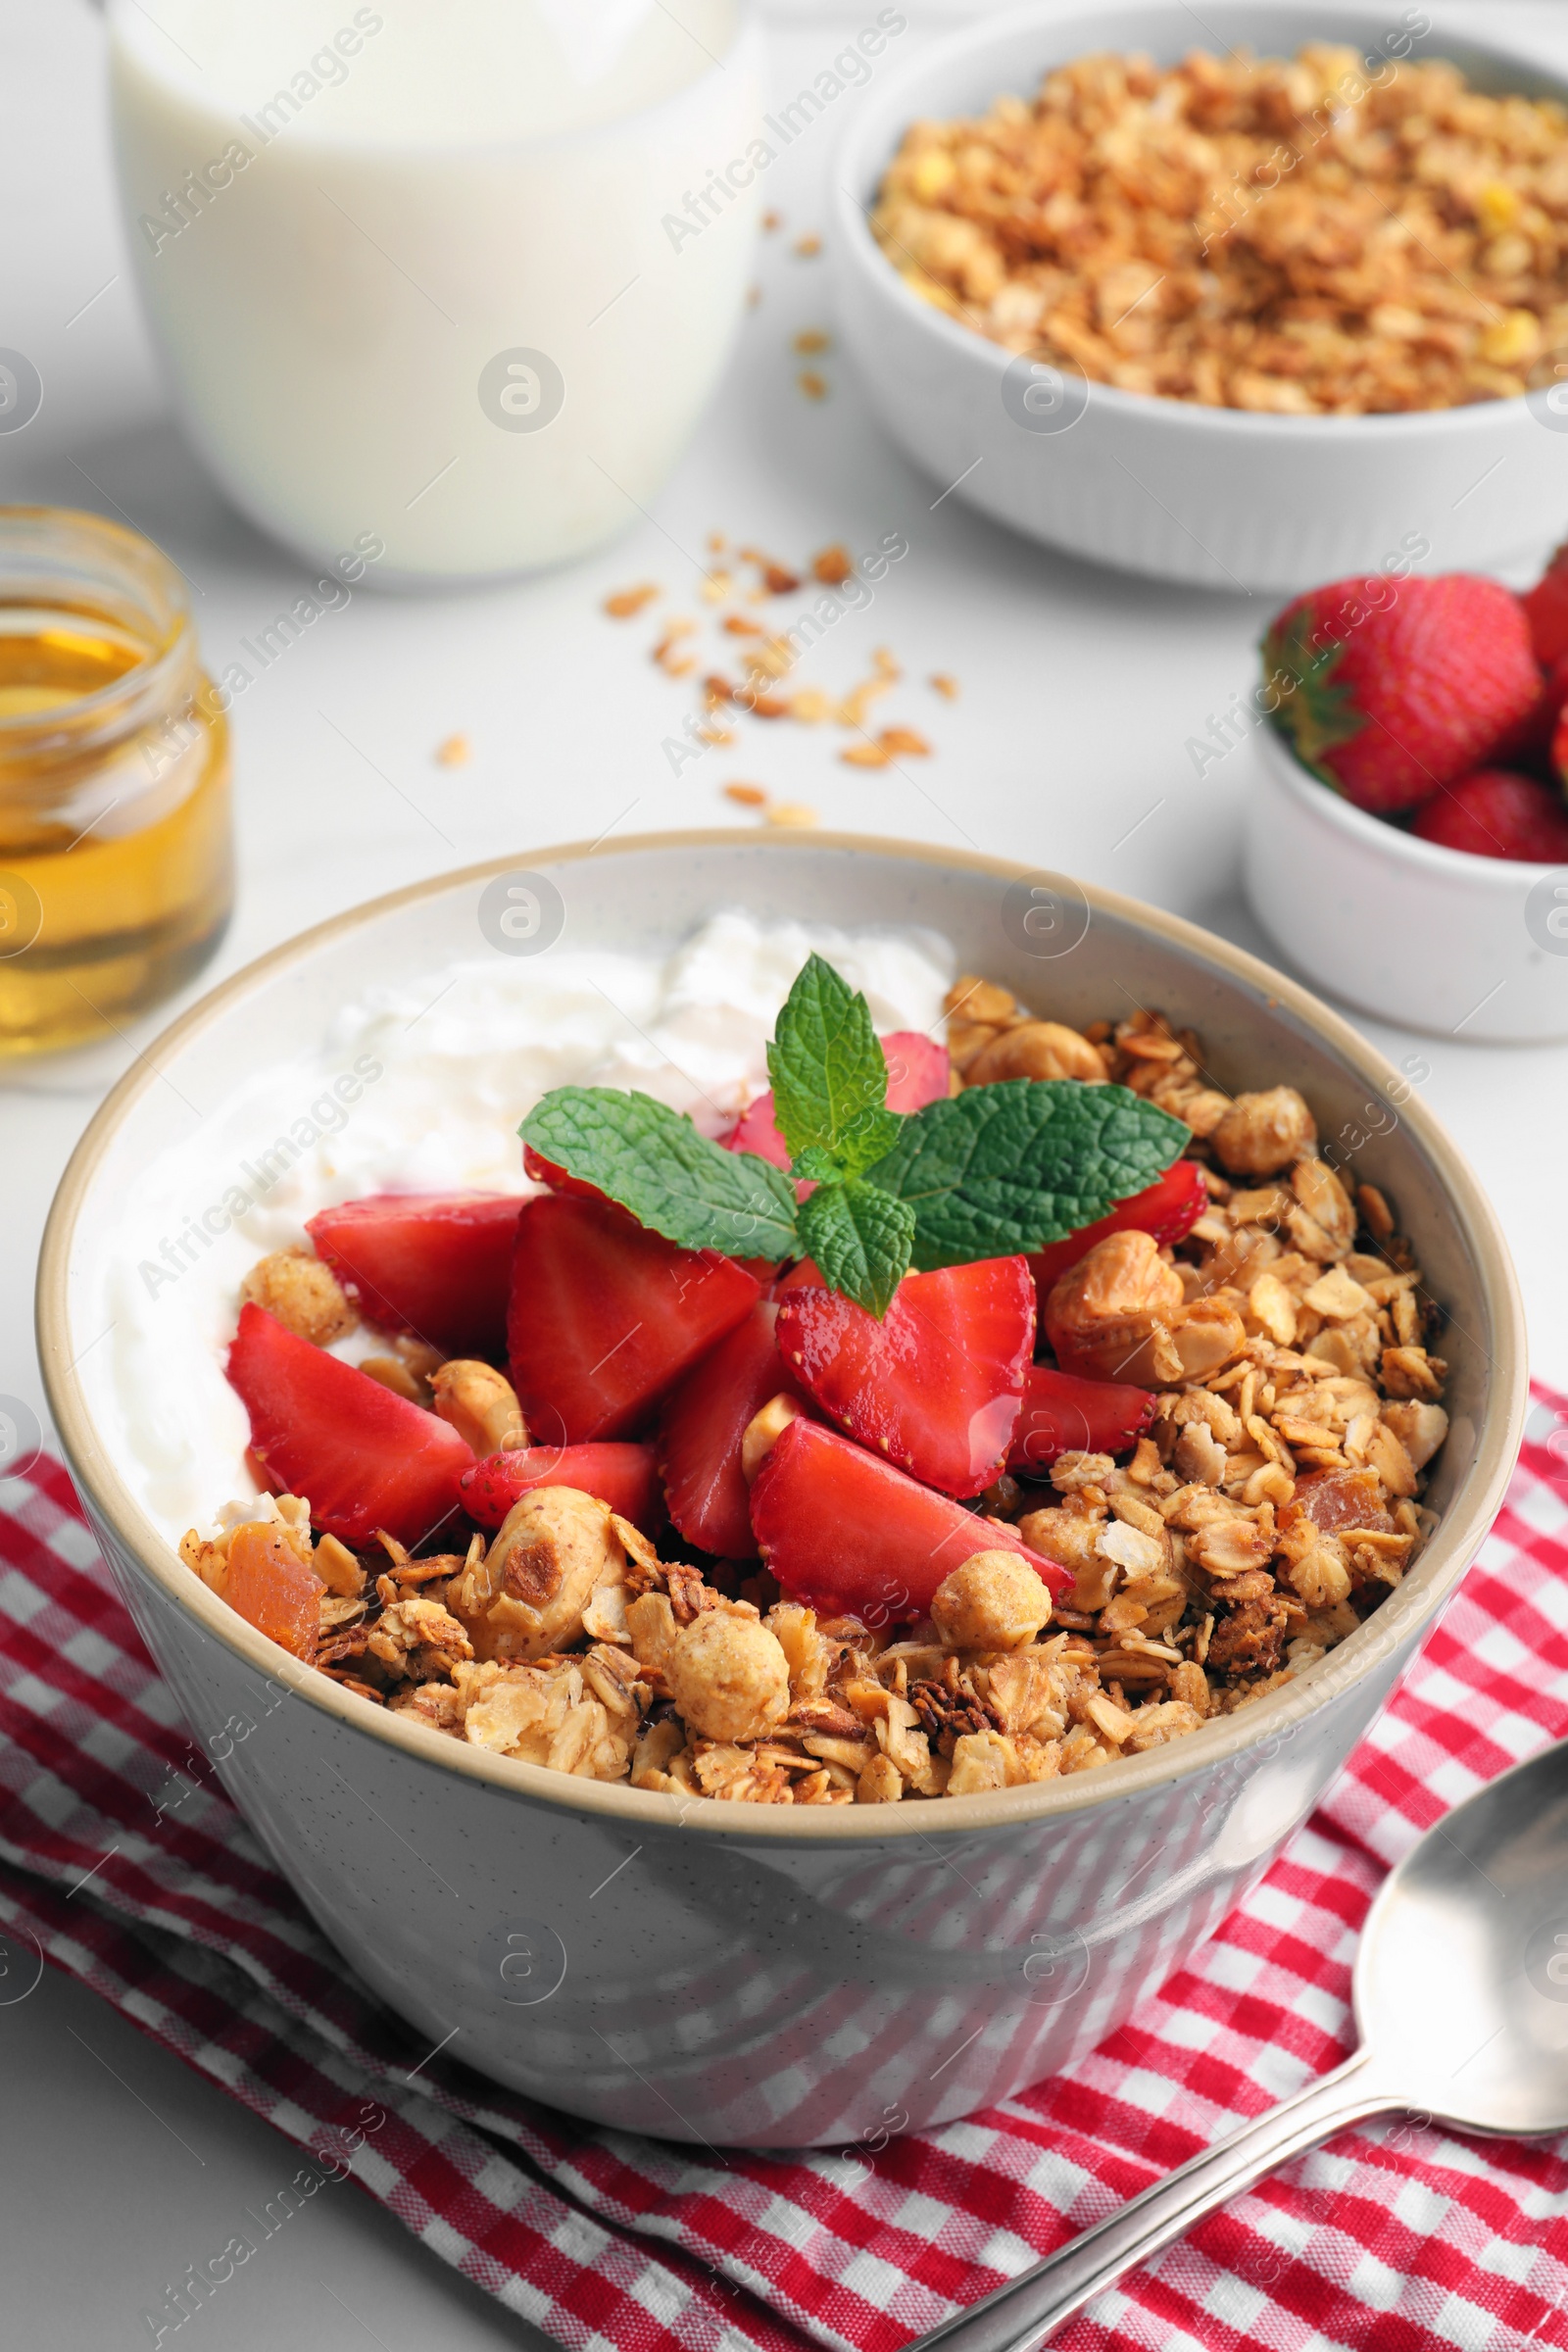 Photo of Bowl with tasty granola and strawberries on table. Healthy meal